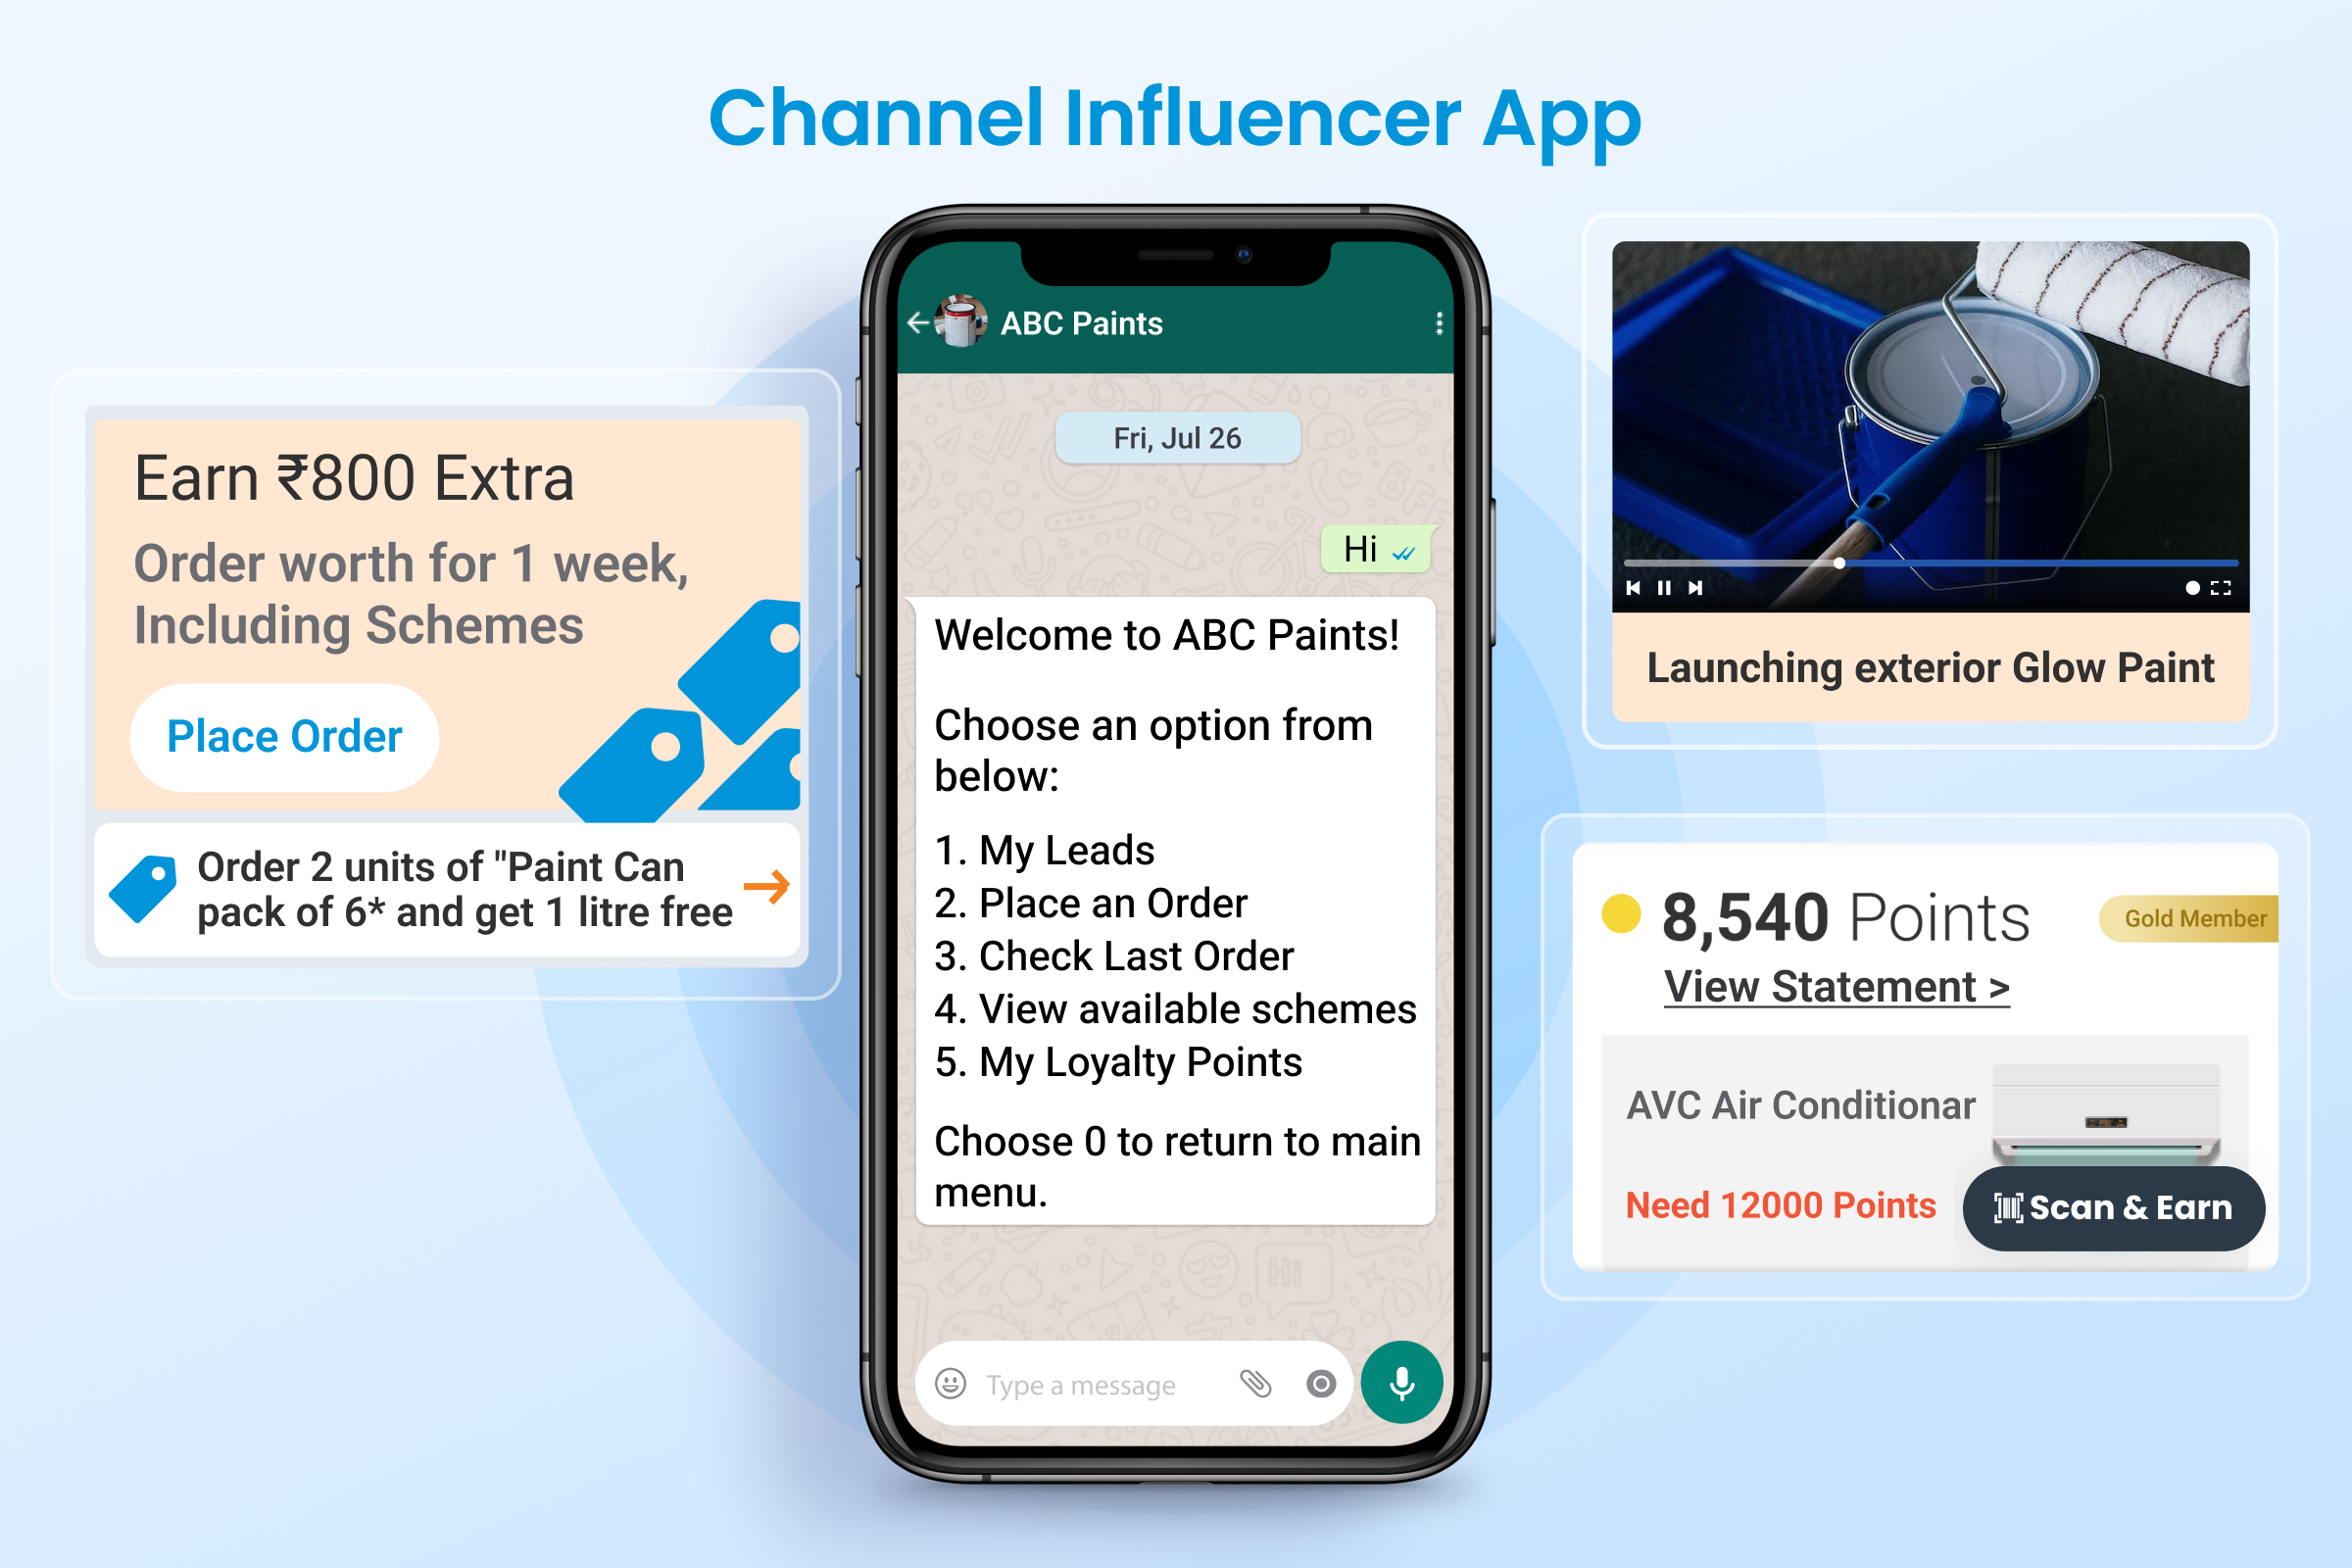 Our channel influencer app is an excellent tool to inform our influencers on things like new launches and loyalty points.